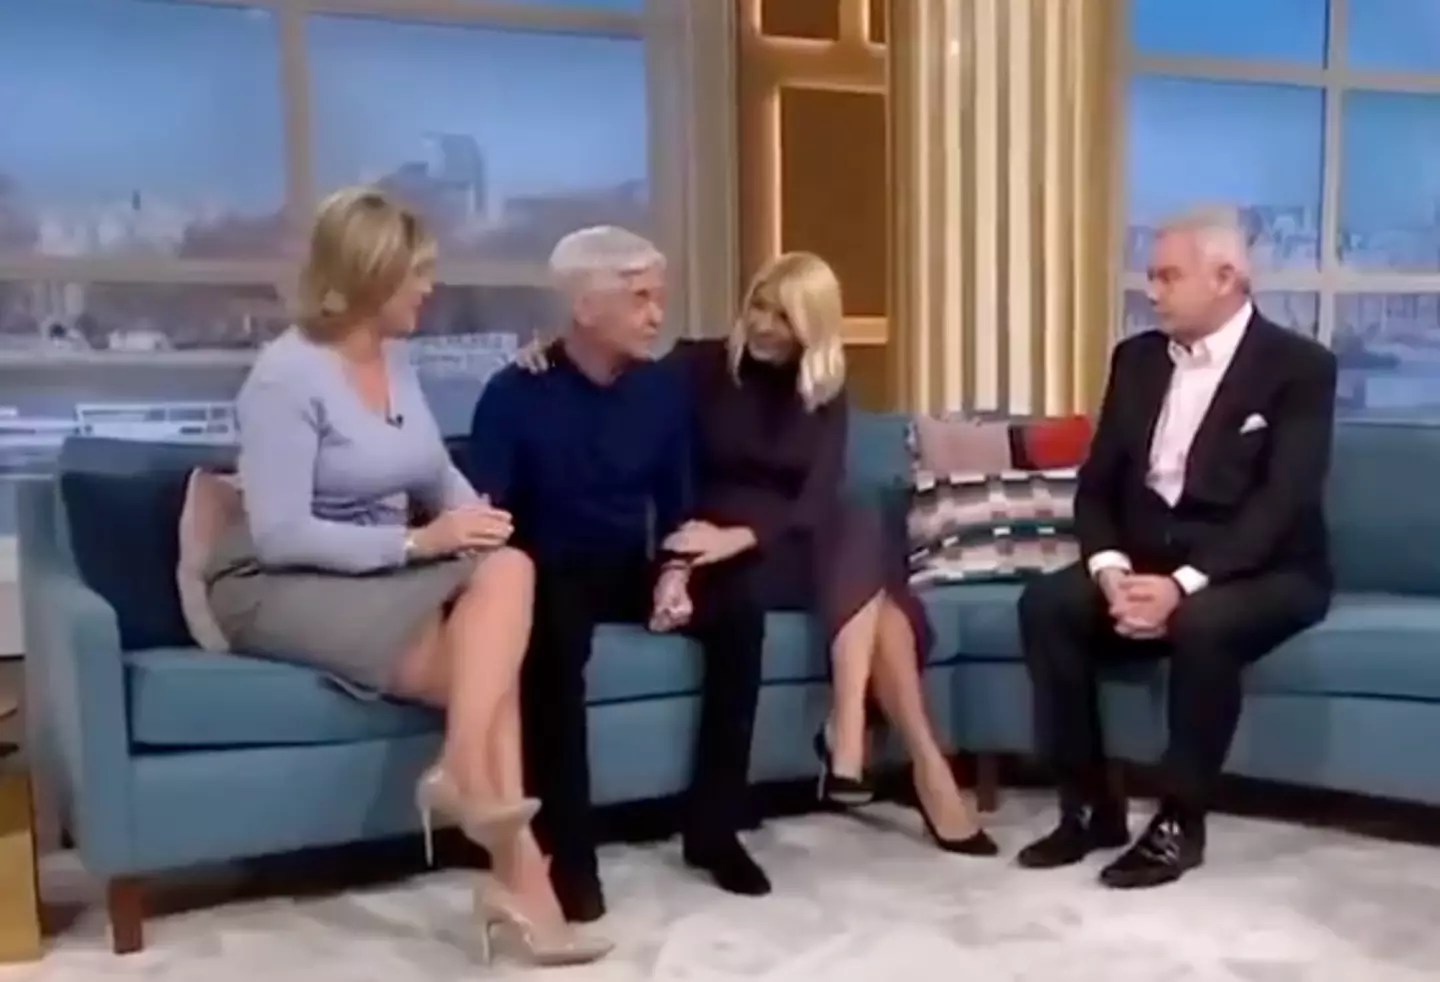 The group all shared a sofa on ITV's This Morning.